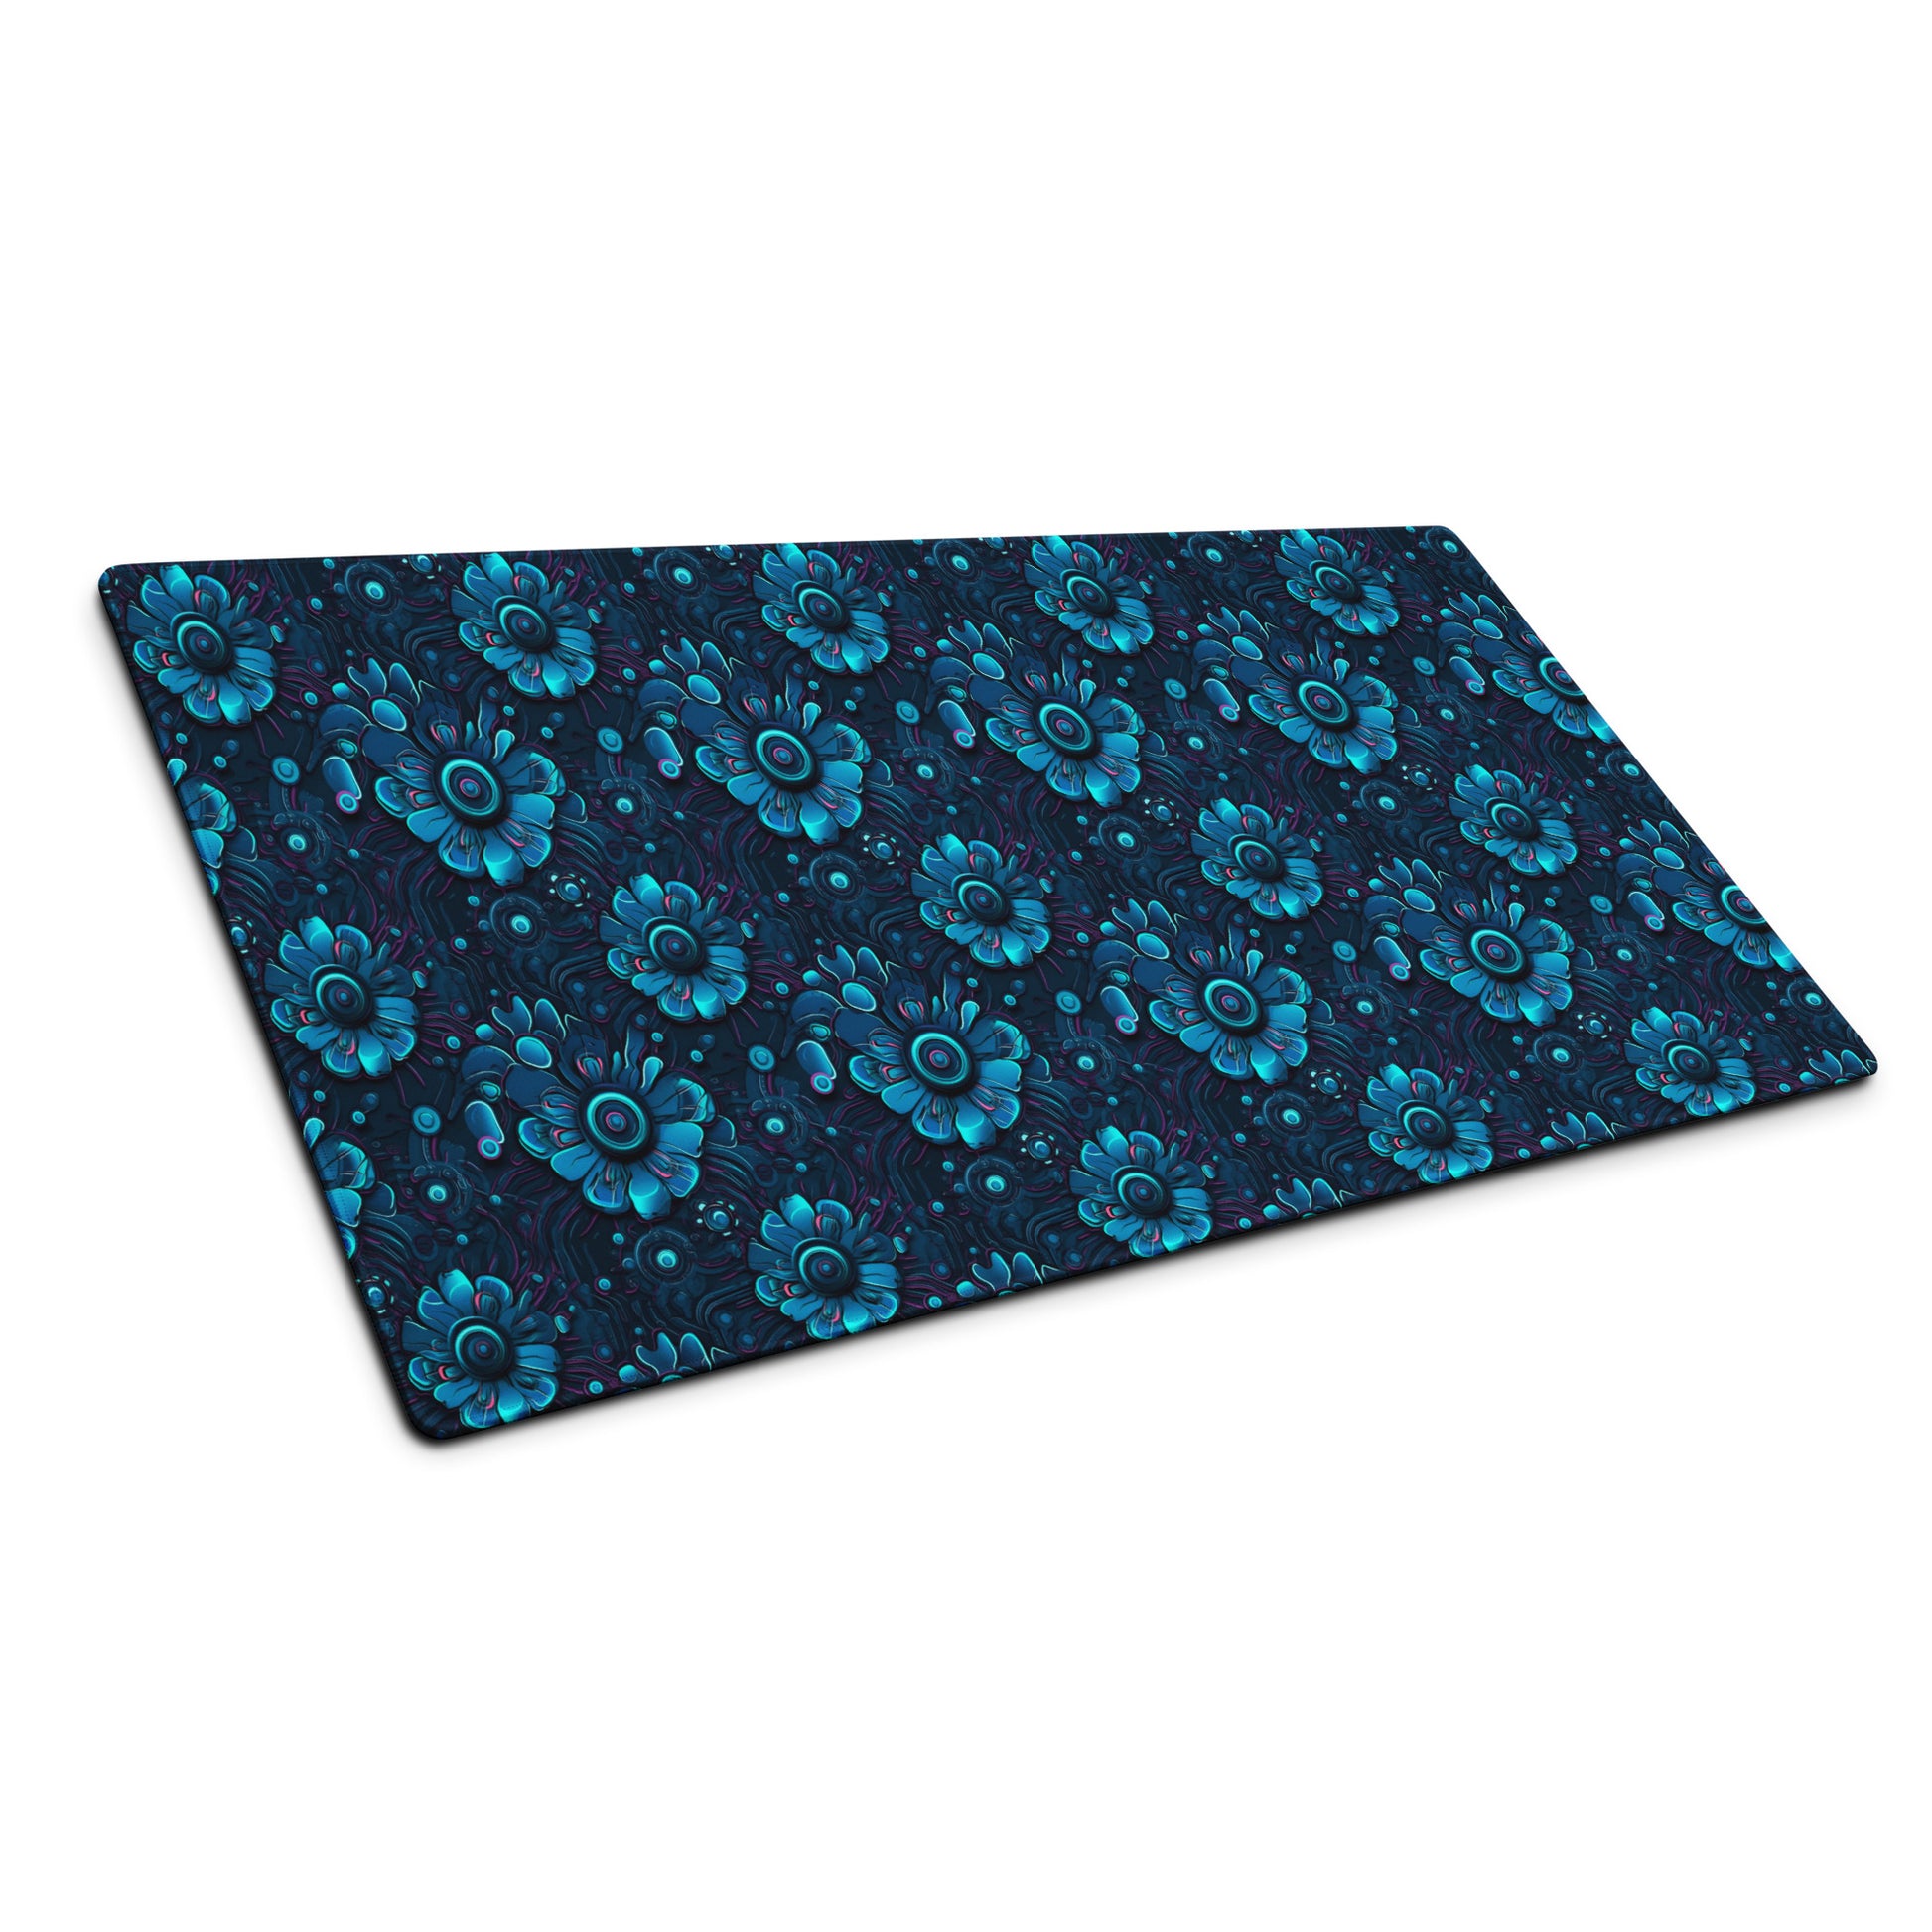 A 36" x 18" desk pad with a blue robotic floral pattern sitting at an angle.